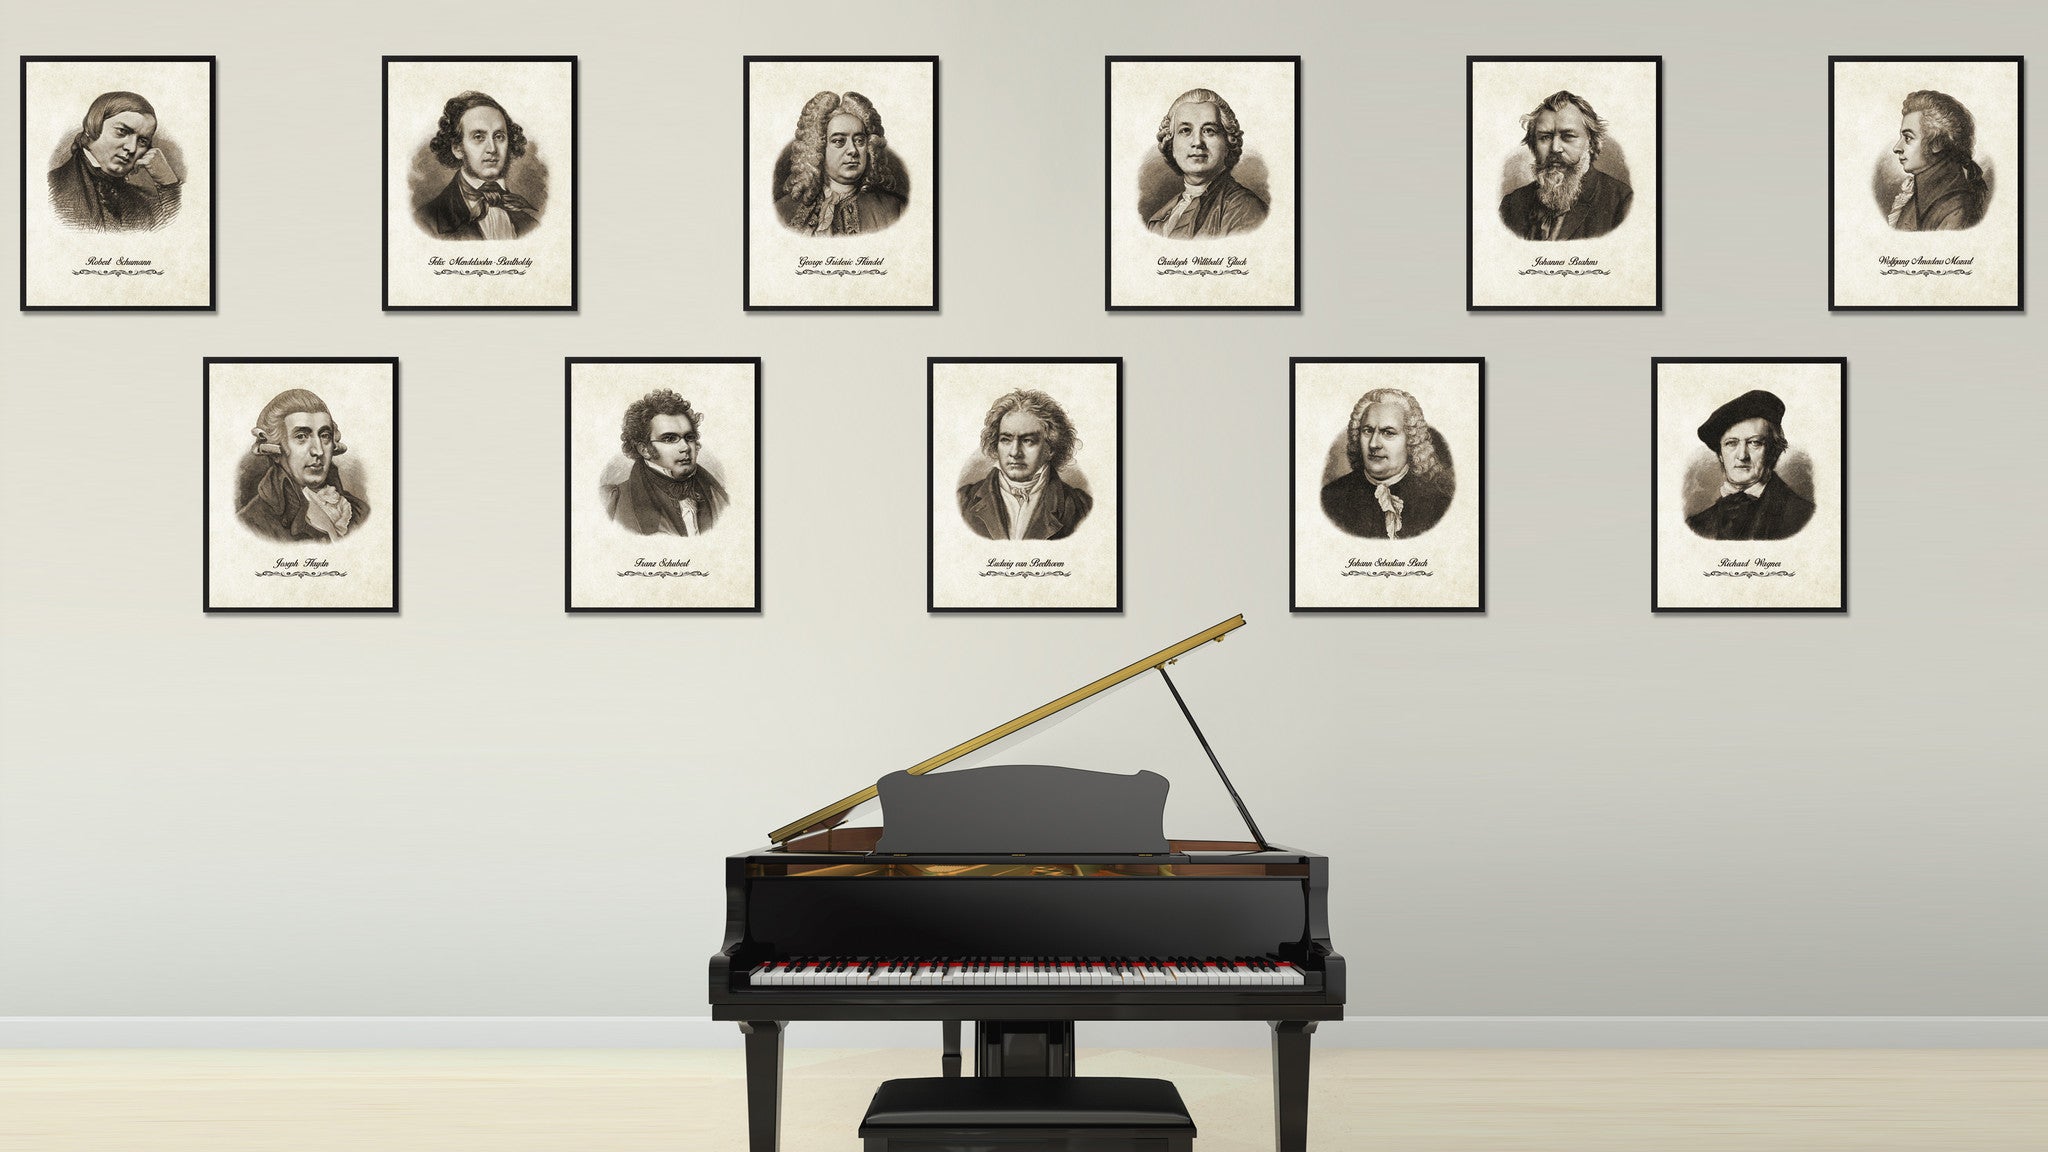 Mozart Musician Canvas Print Pictures Frames Music Home Décor Wall Art Gifts